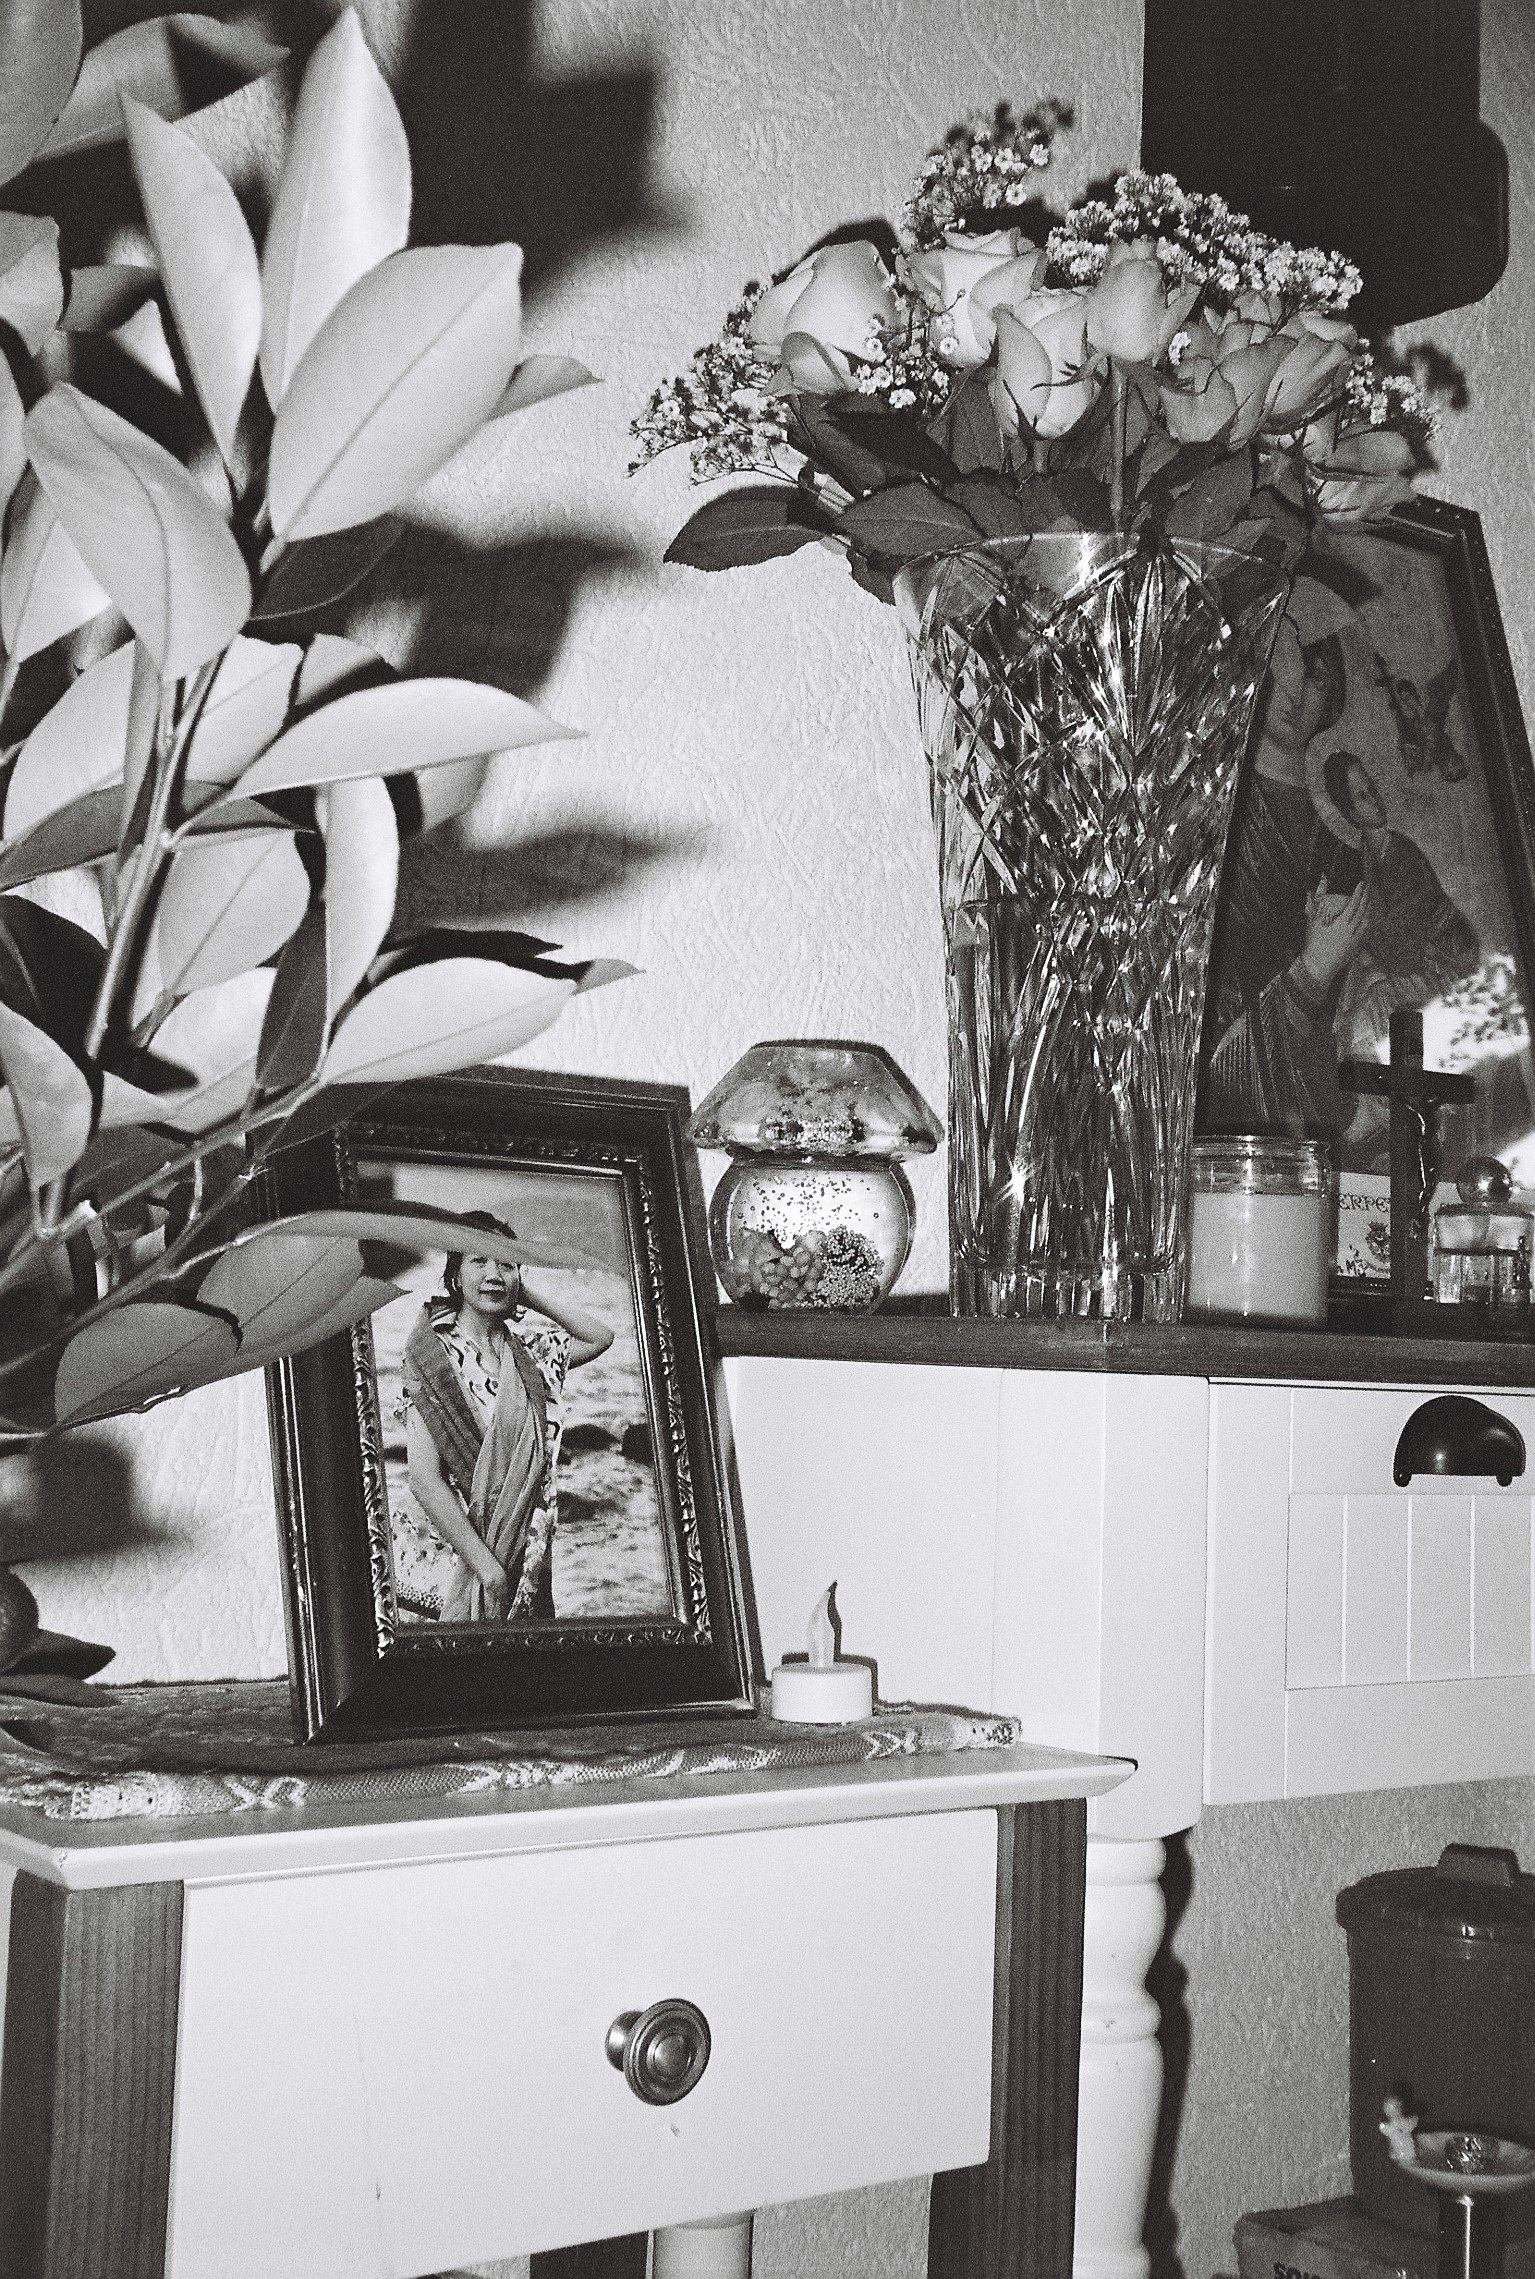 A glass vase with roses, next to it a framed photo of a woman.